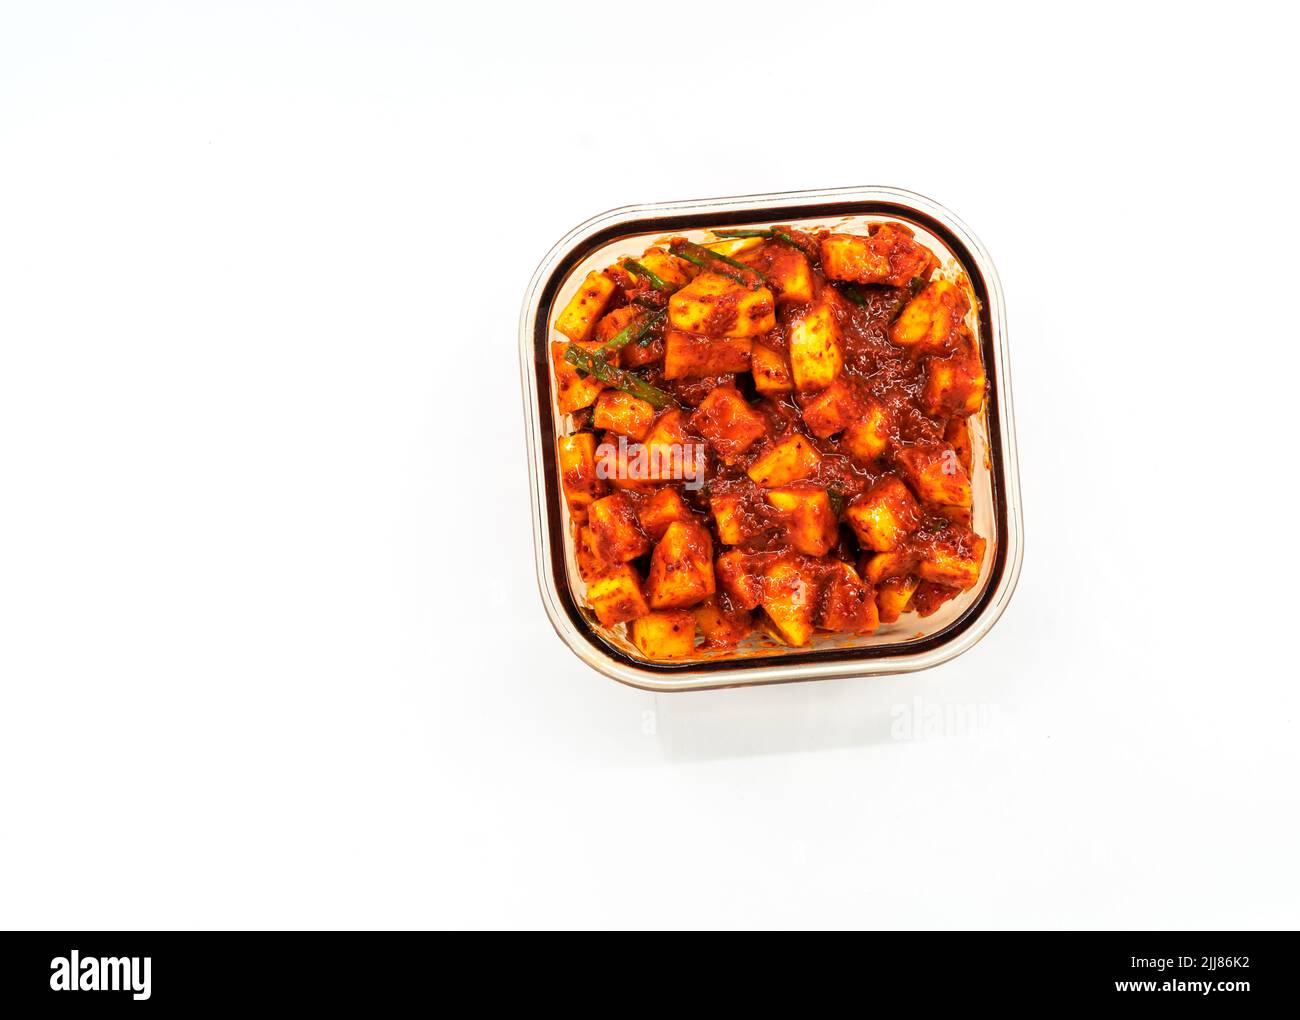 Top view Radish Kimchi in a brown-glass container, rectangle shape. Isolated Korean healthy food or Kimchi on white background. Flat lay image of Radi Stock Photo